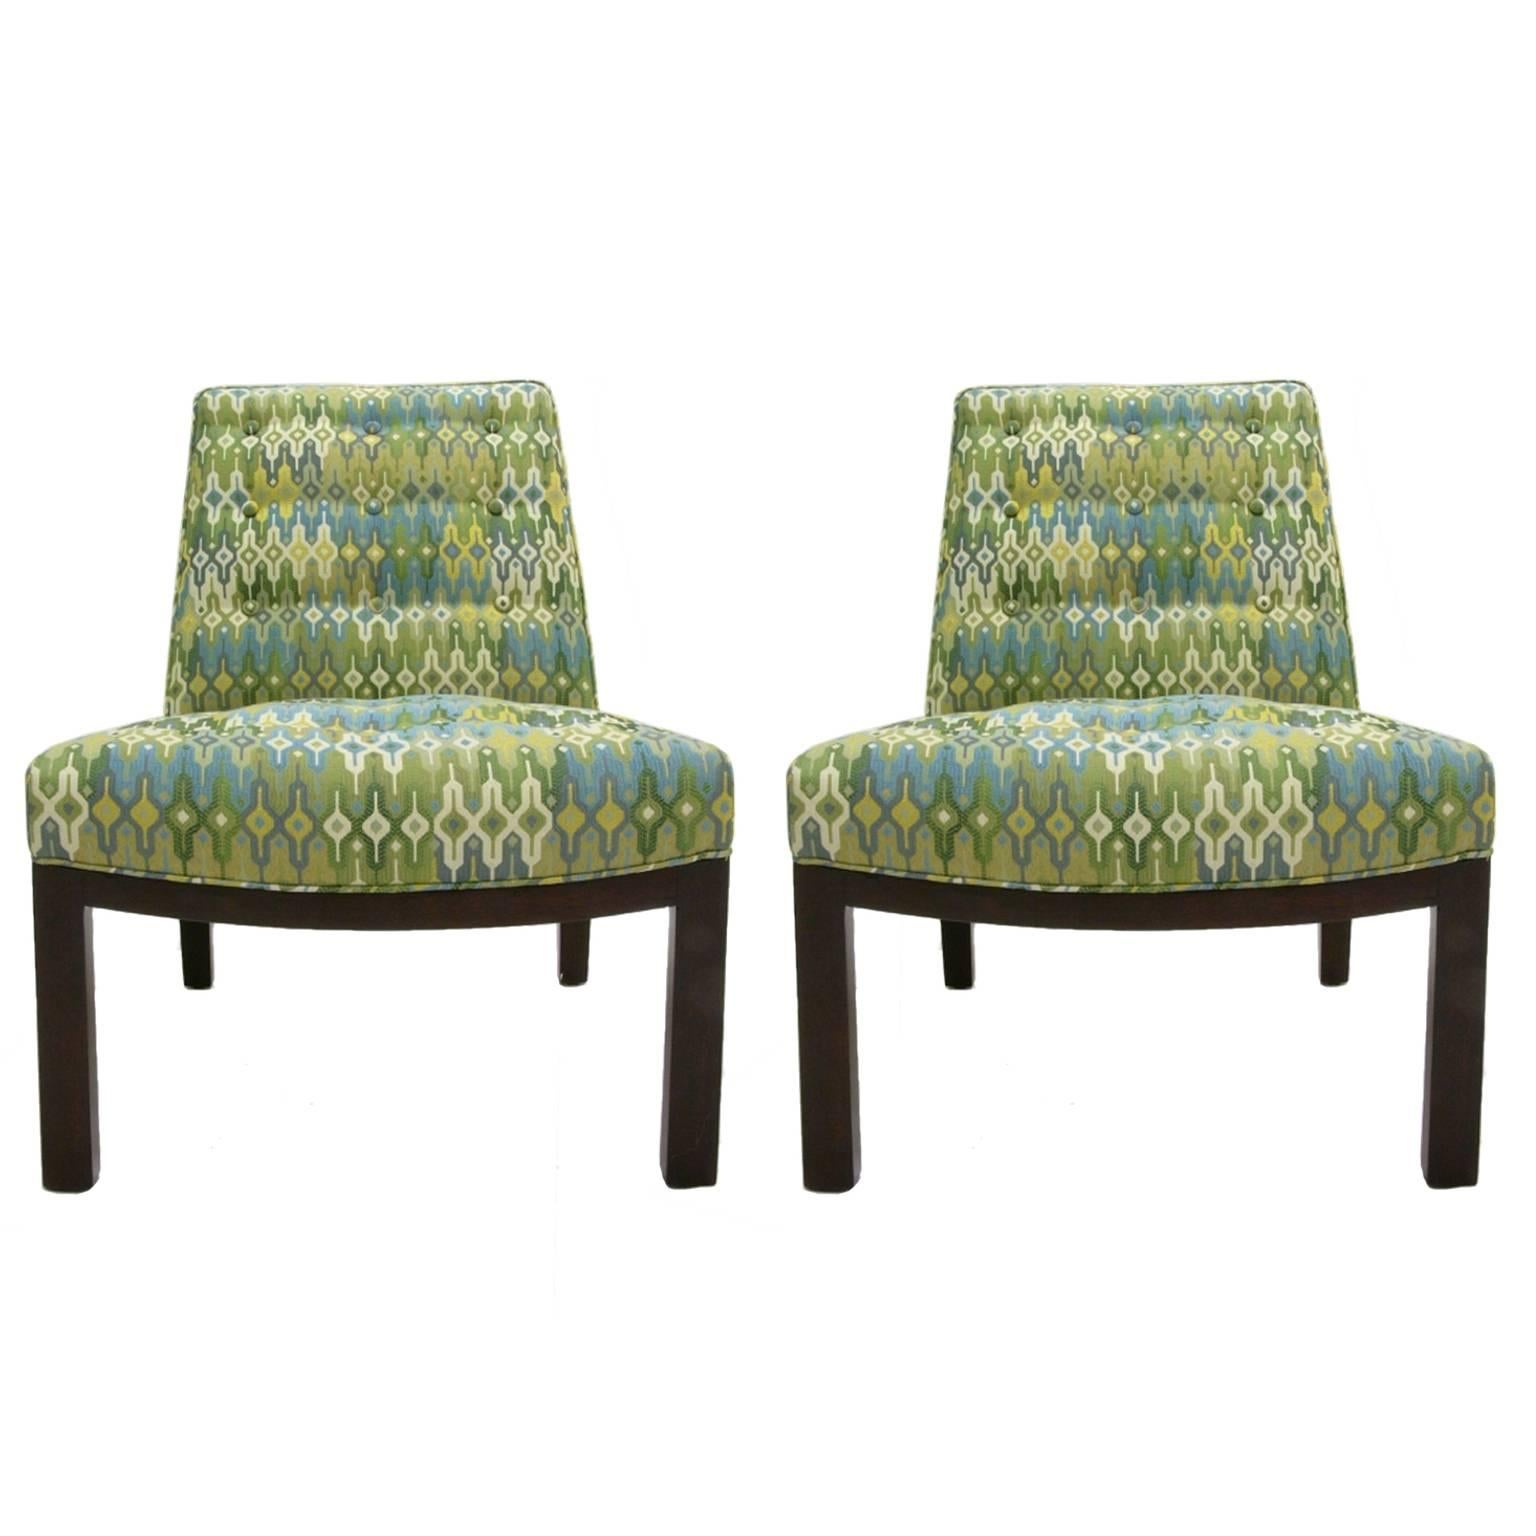 Stunning pair of freshly upholstered slipper chairs designed by Edward Wormley for Dunbar. Upholstered in a grand geometric print silken upholstery.